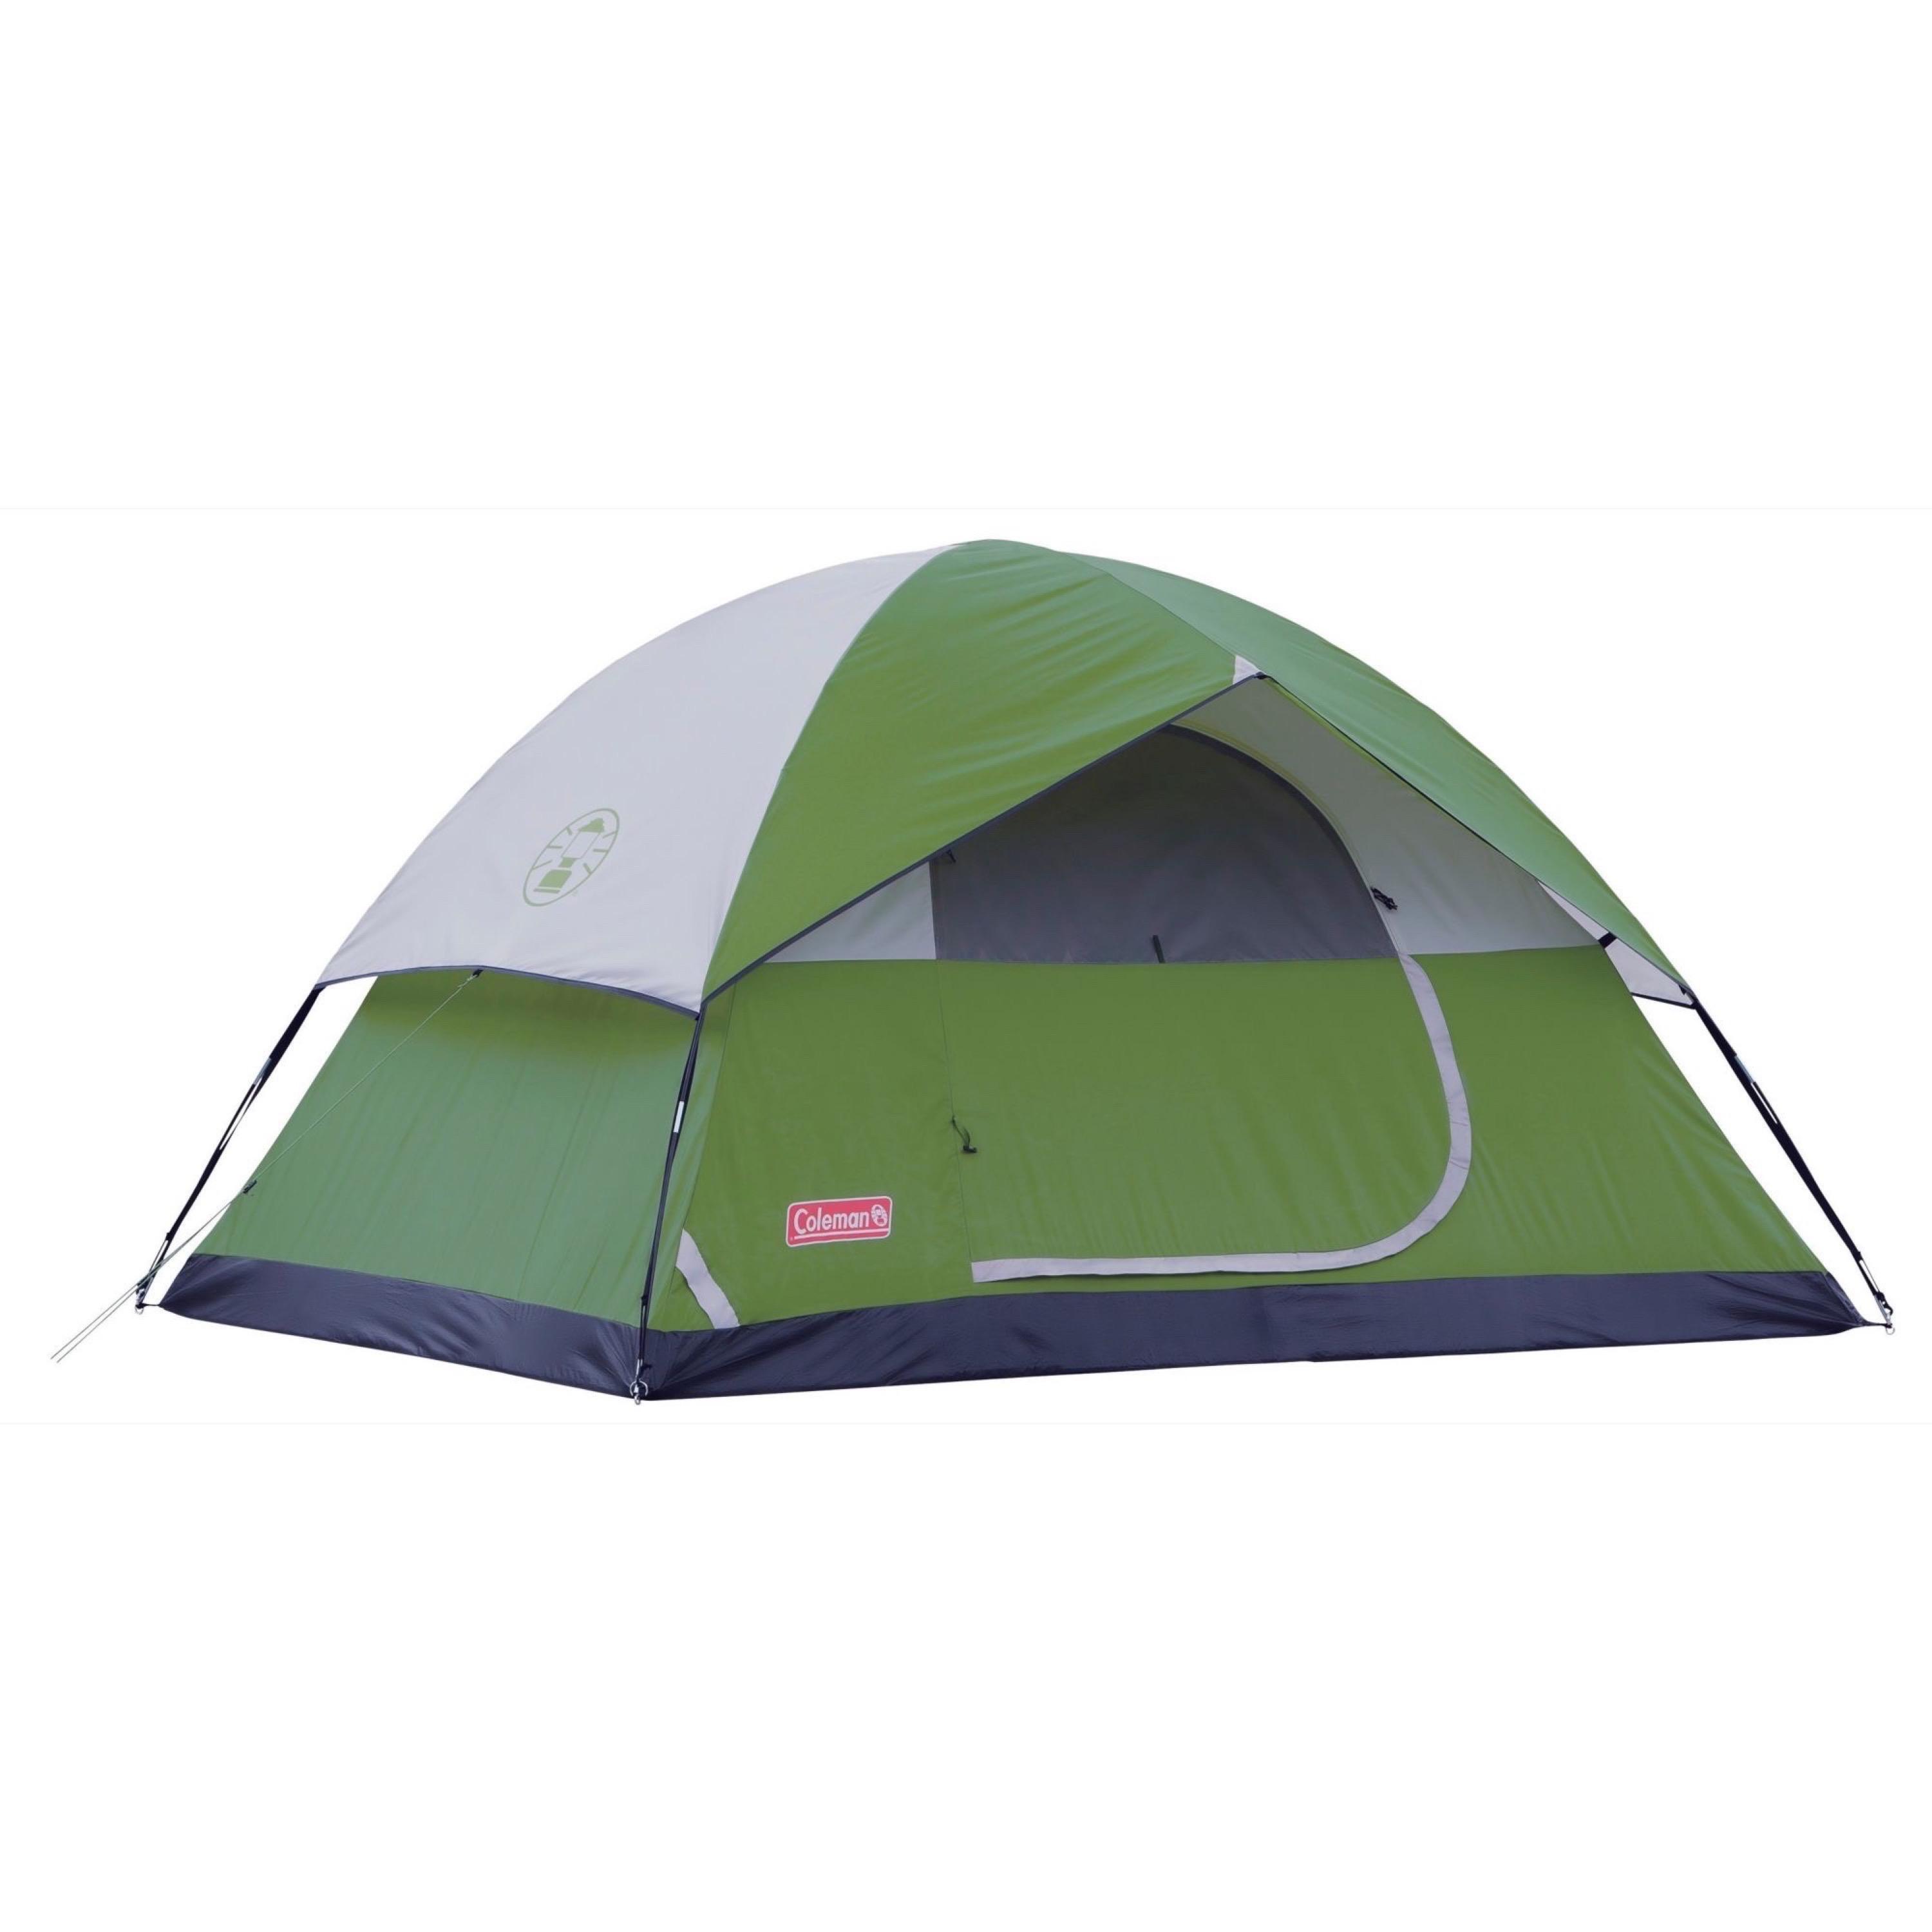 Coleman Sundome 4-Person Dome Camping Tent, 1 Room, Green - image 1 of 8